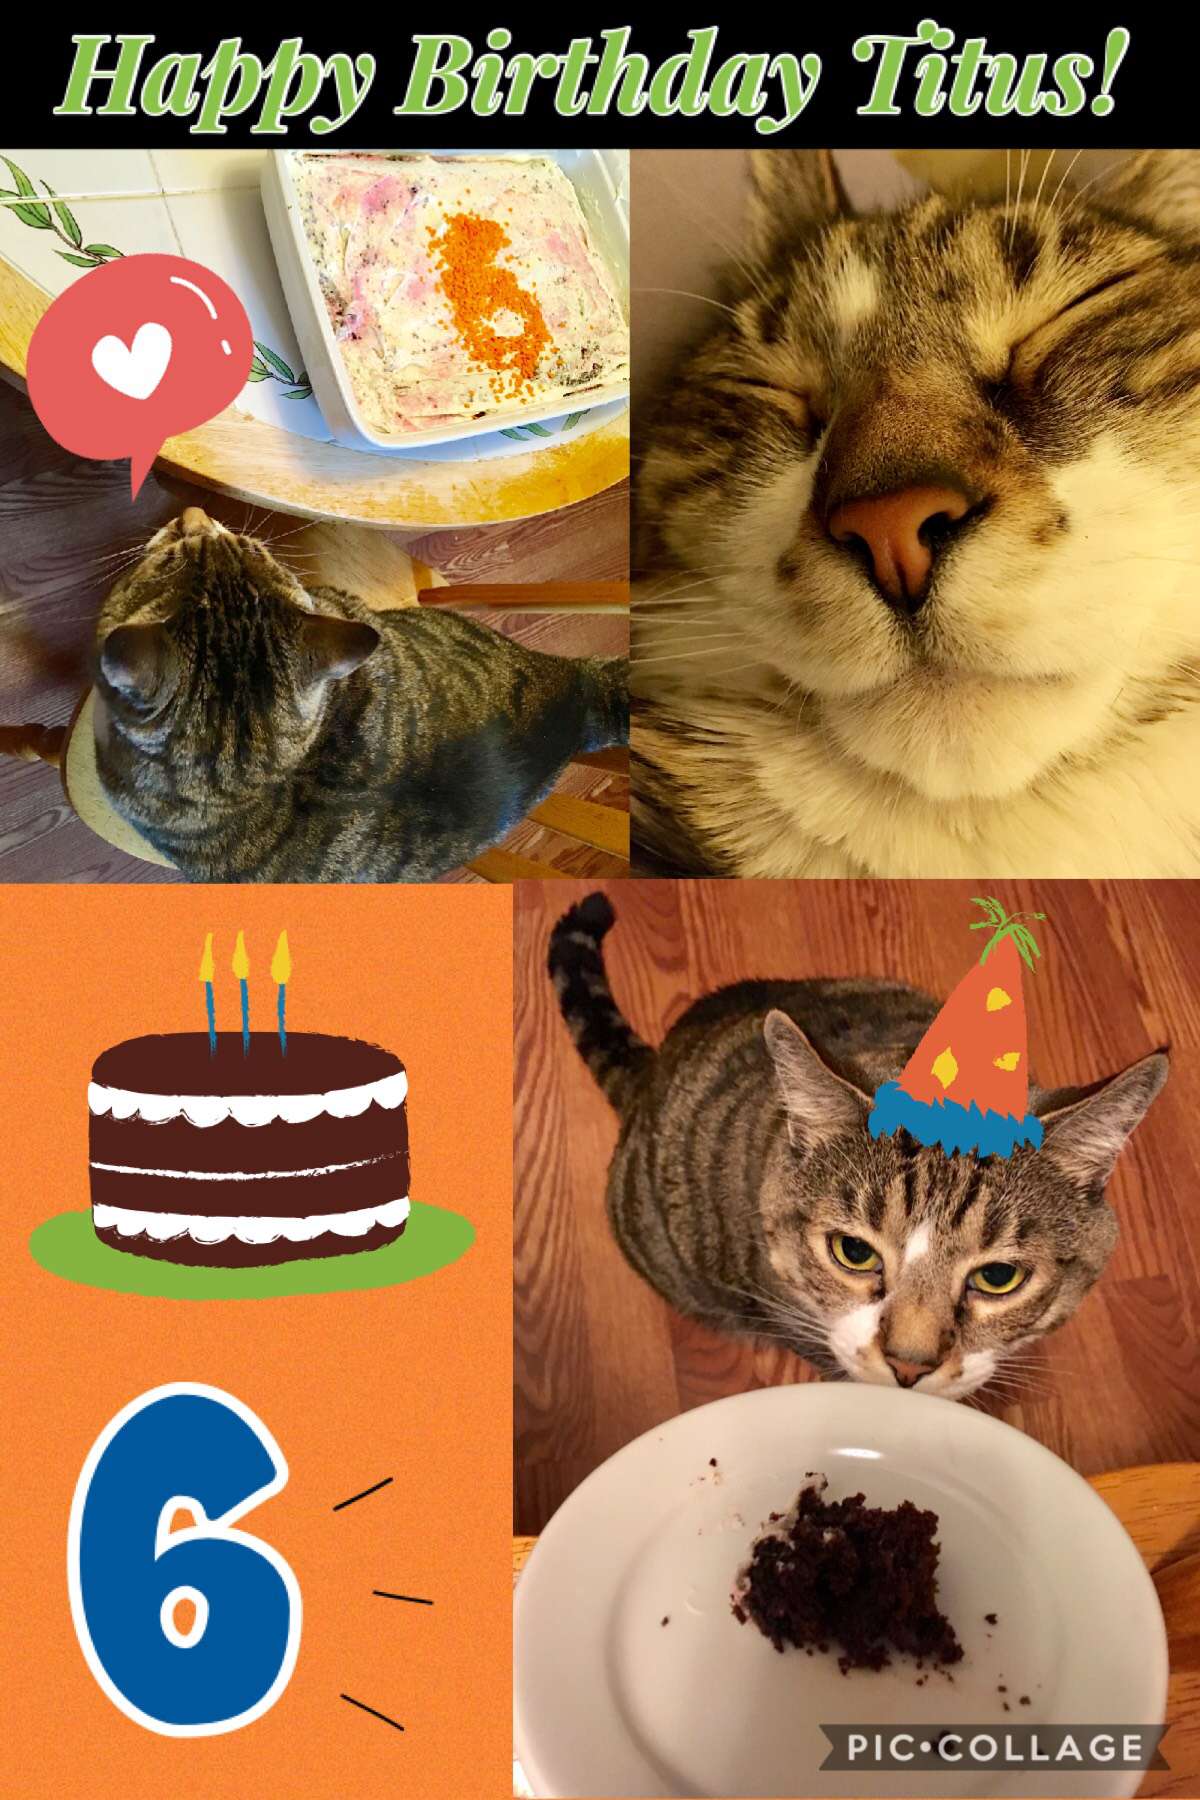 🎈His birthday was yesterday! 😸 🎉 Technically he’s 42 now. 😆 He’s quirky and loves sweets, so I made him a cake the other day! 🎂 Ik it looks crāppy, but it’s pretty good. 😹 I love him sm. 😽 💚 It was International Fairy Day too! 🧚🏻‍♀️ Update coming later. ⏰